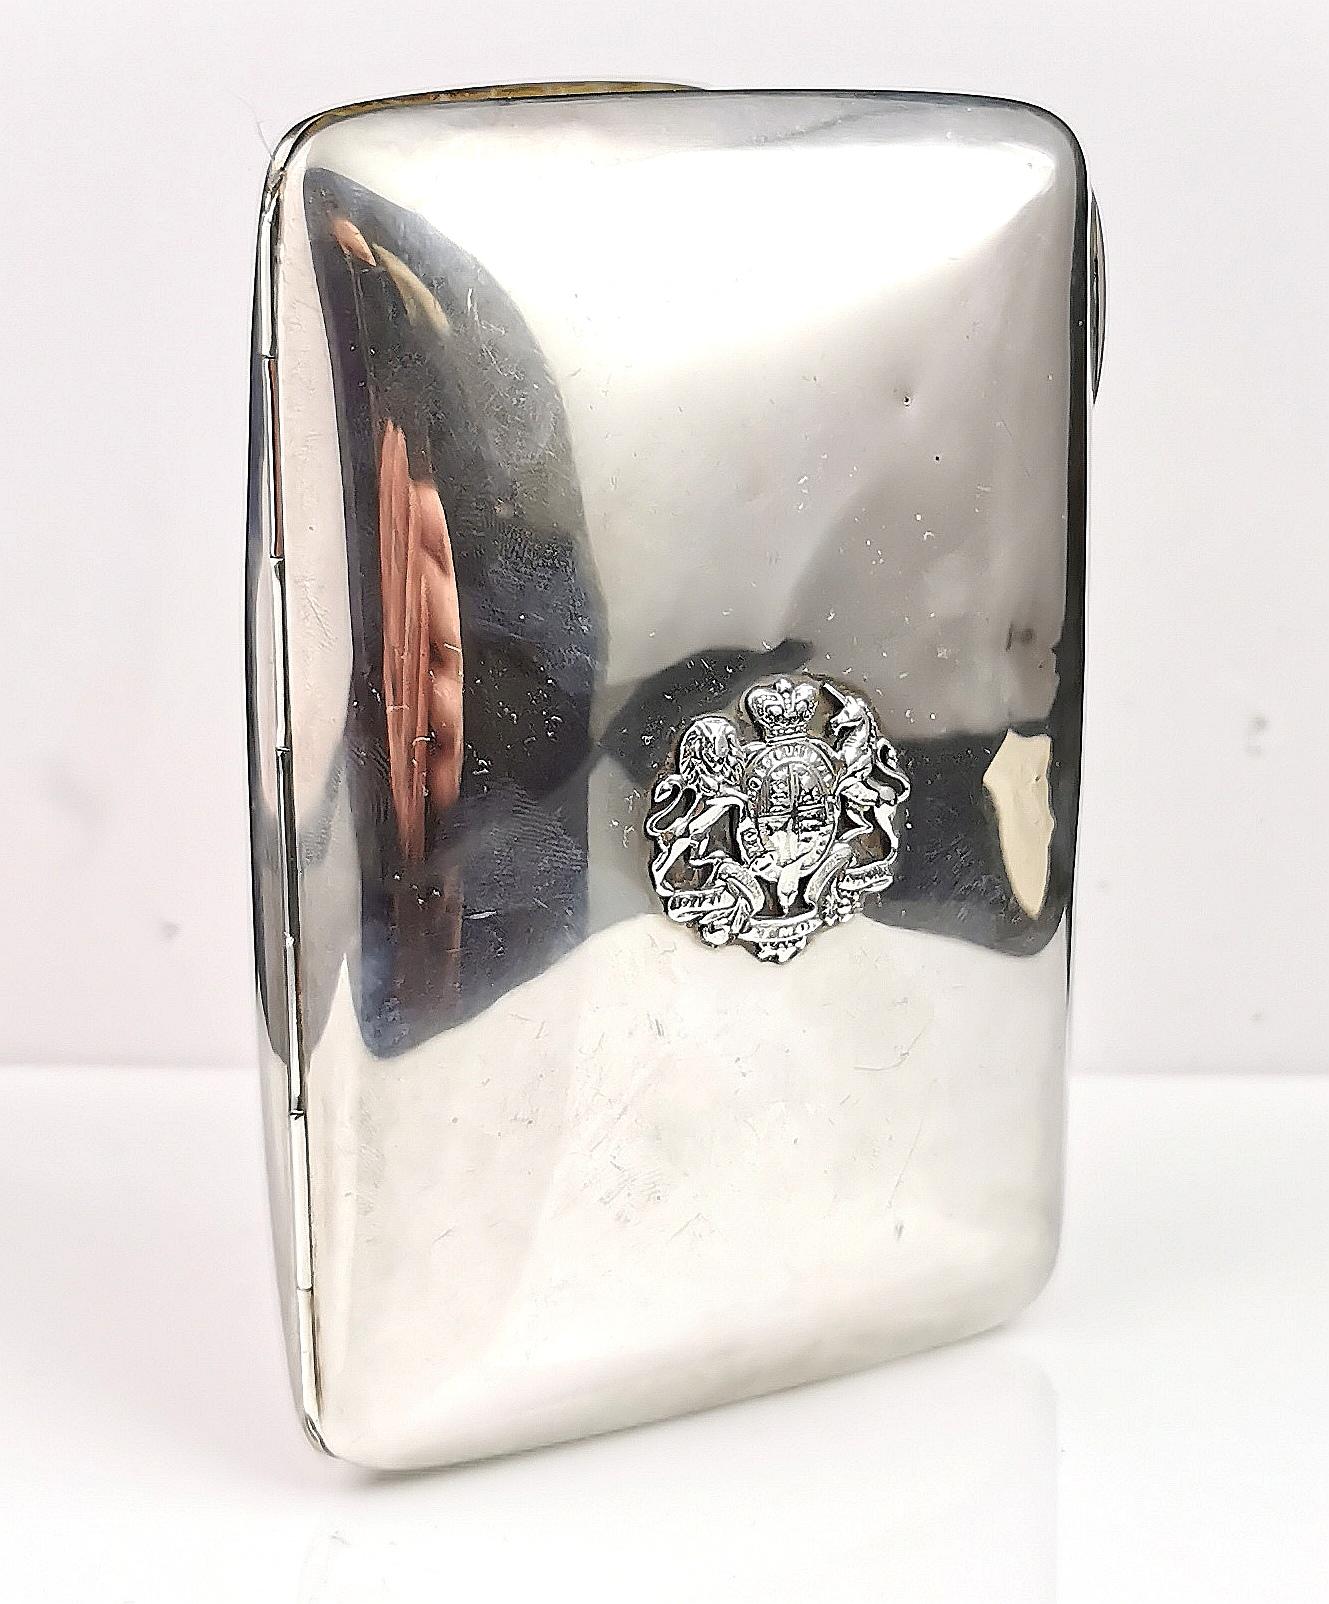 An attractive and interesting antique sterling silver cigar case.

A lovely substantial and heavy piece, made from smooth high polished sterling silver, the case is gilt lined and still retains most of its rich gilt finish.

The front has an